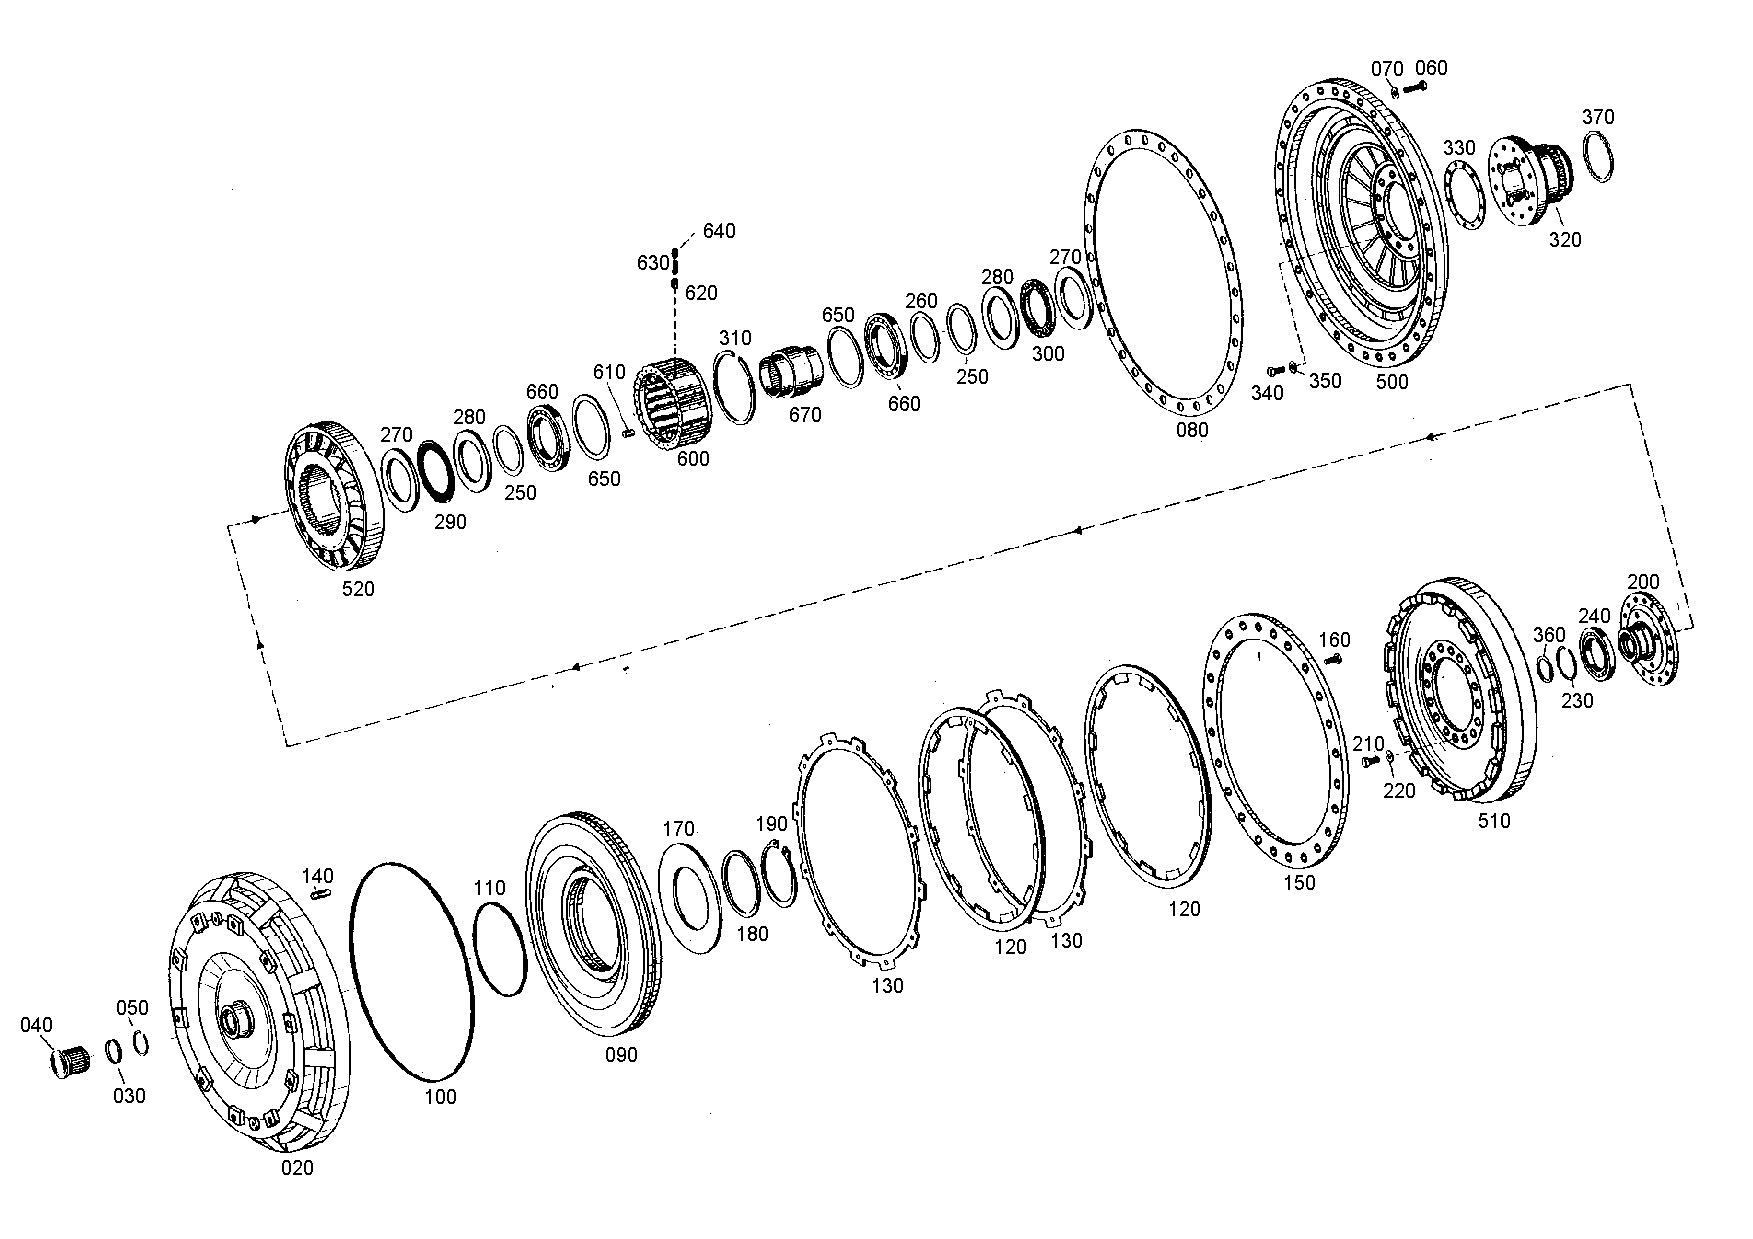 drawing for BEISSBARTH & MUELLER GMBH & CO. 09398062 - END SHIM (figure 4)